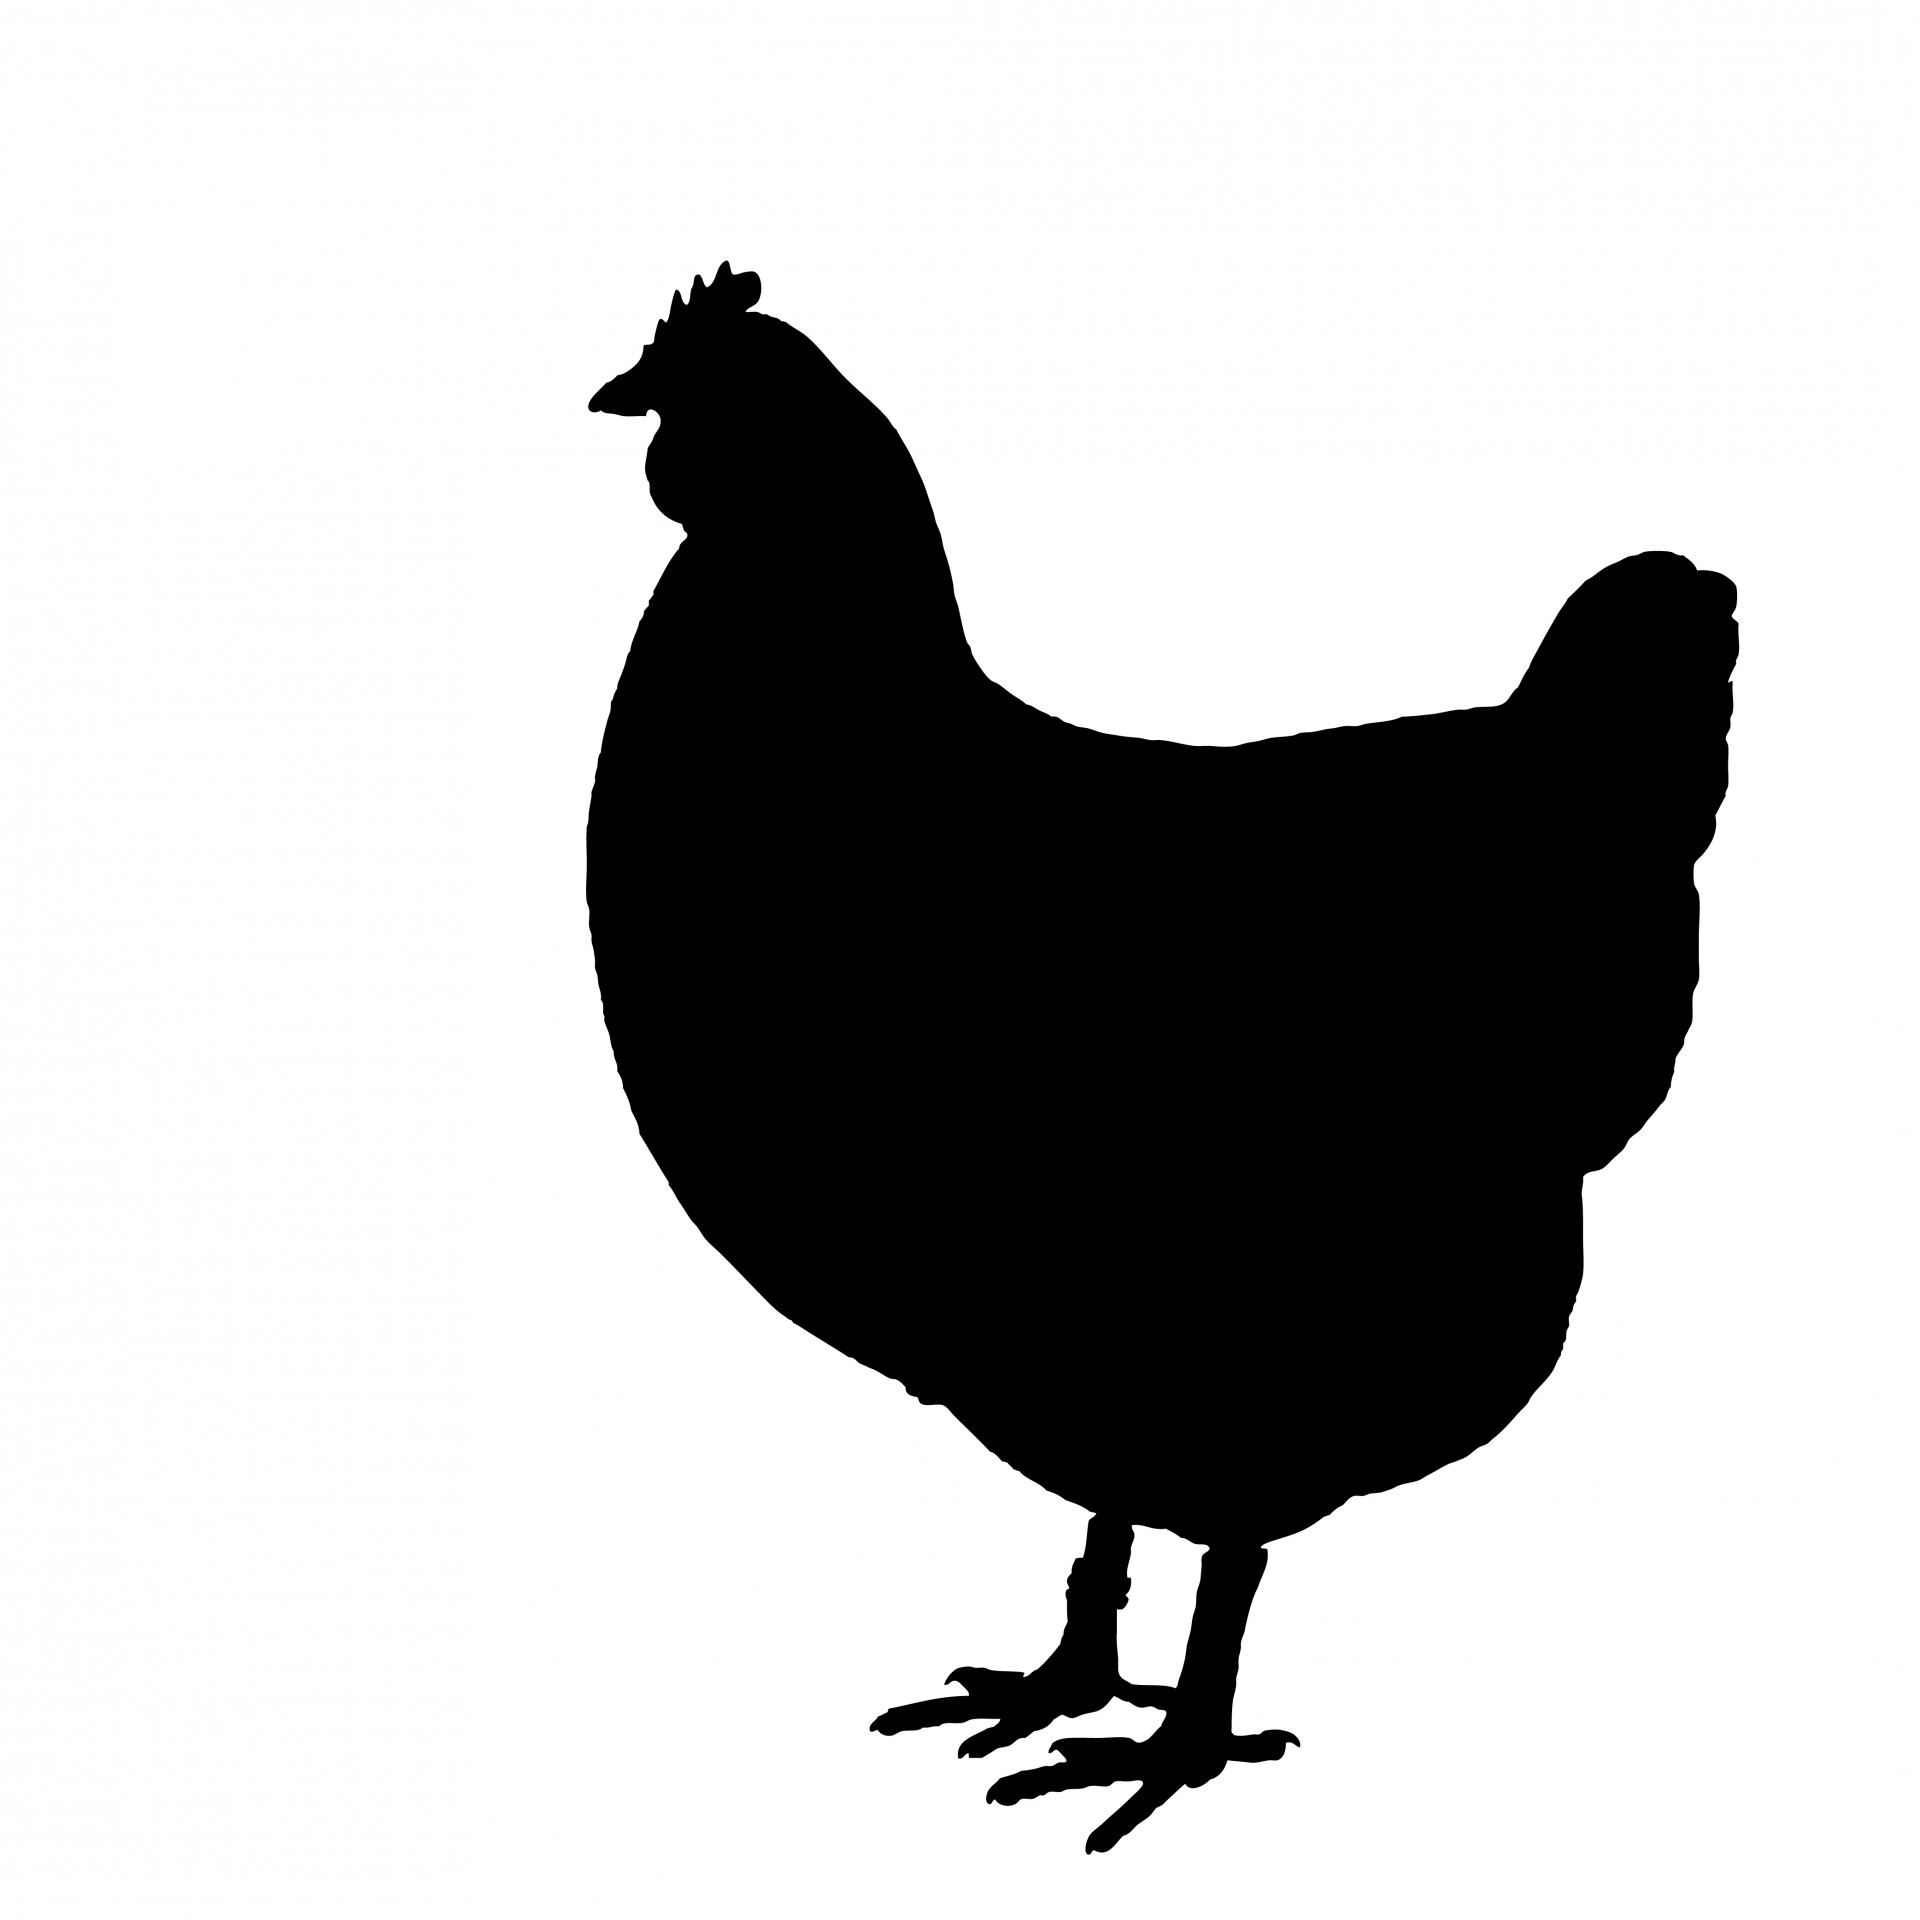 Chicken Silhouette Clip Art Transparent Png Clipart Images Free | The ...